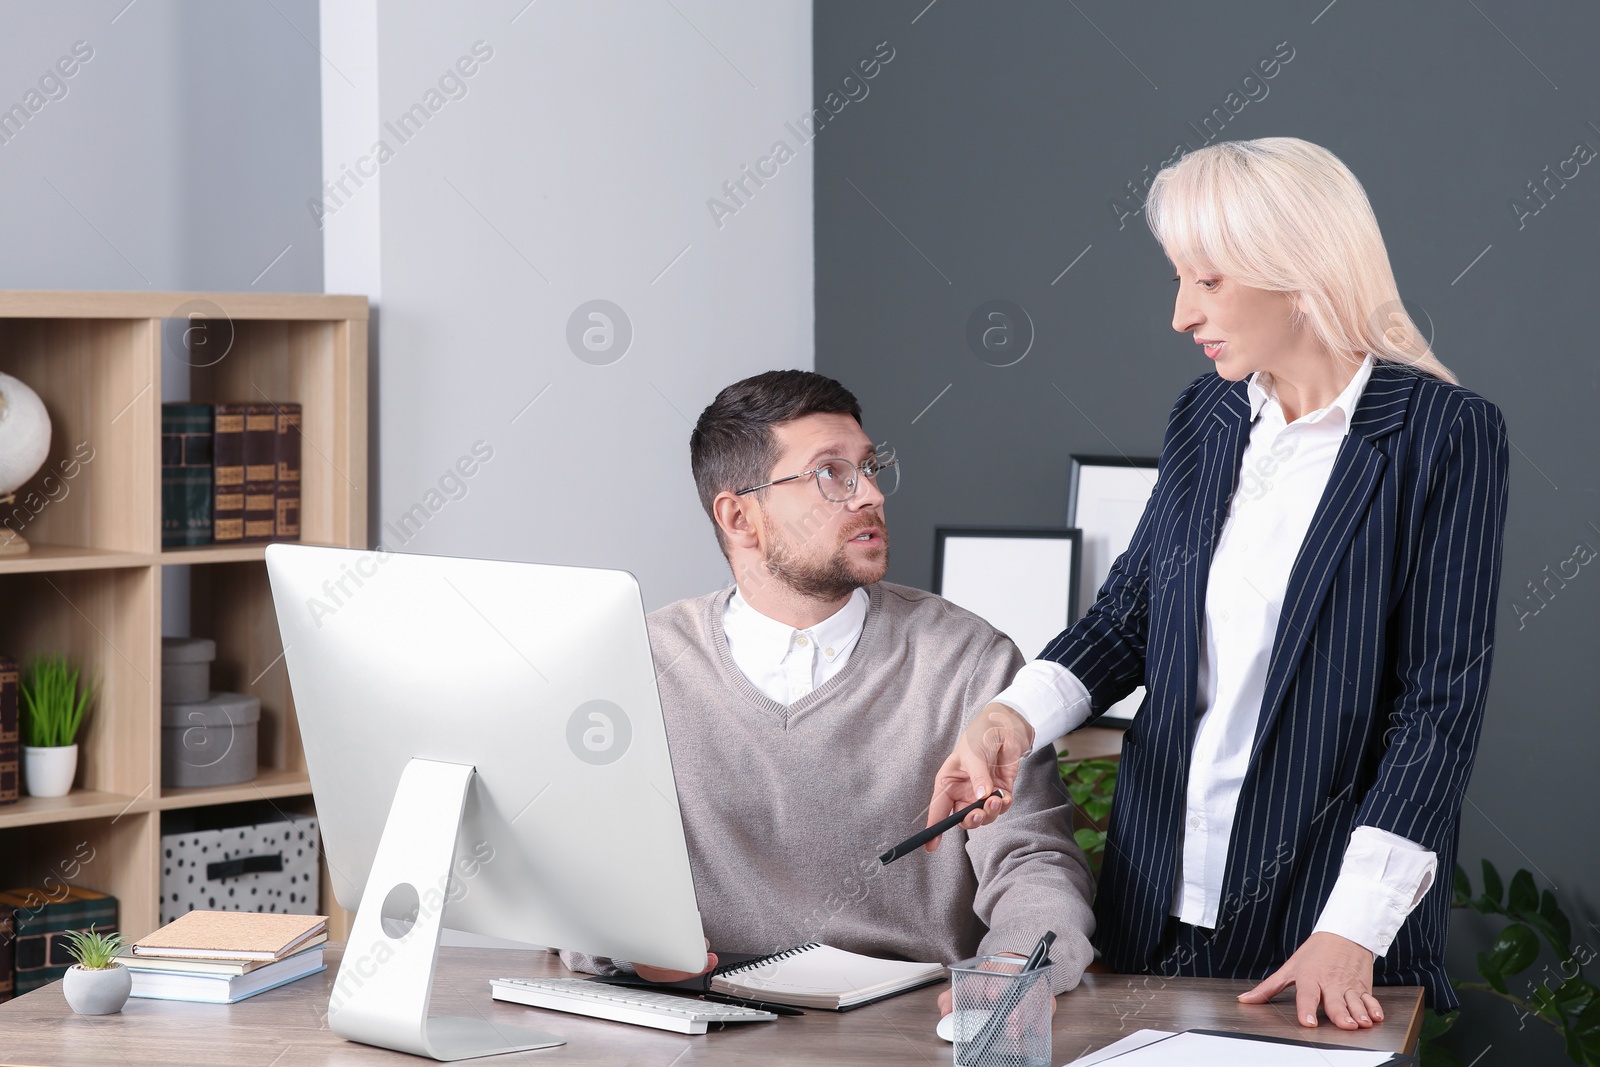 Photo of Boss discussing work issues with employee and pointing at notebook in office